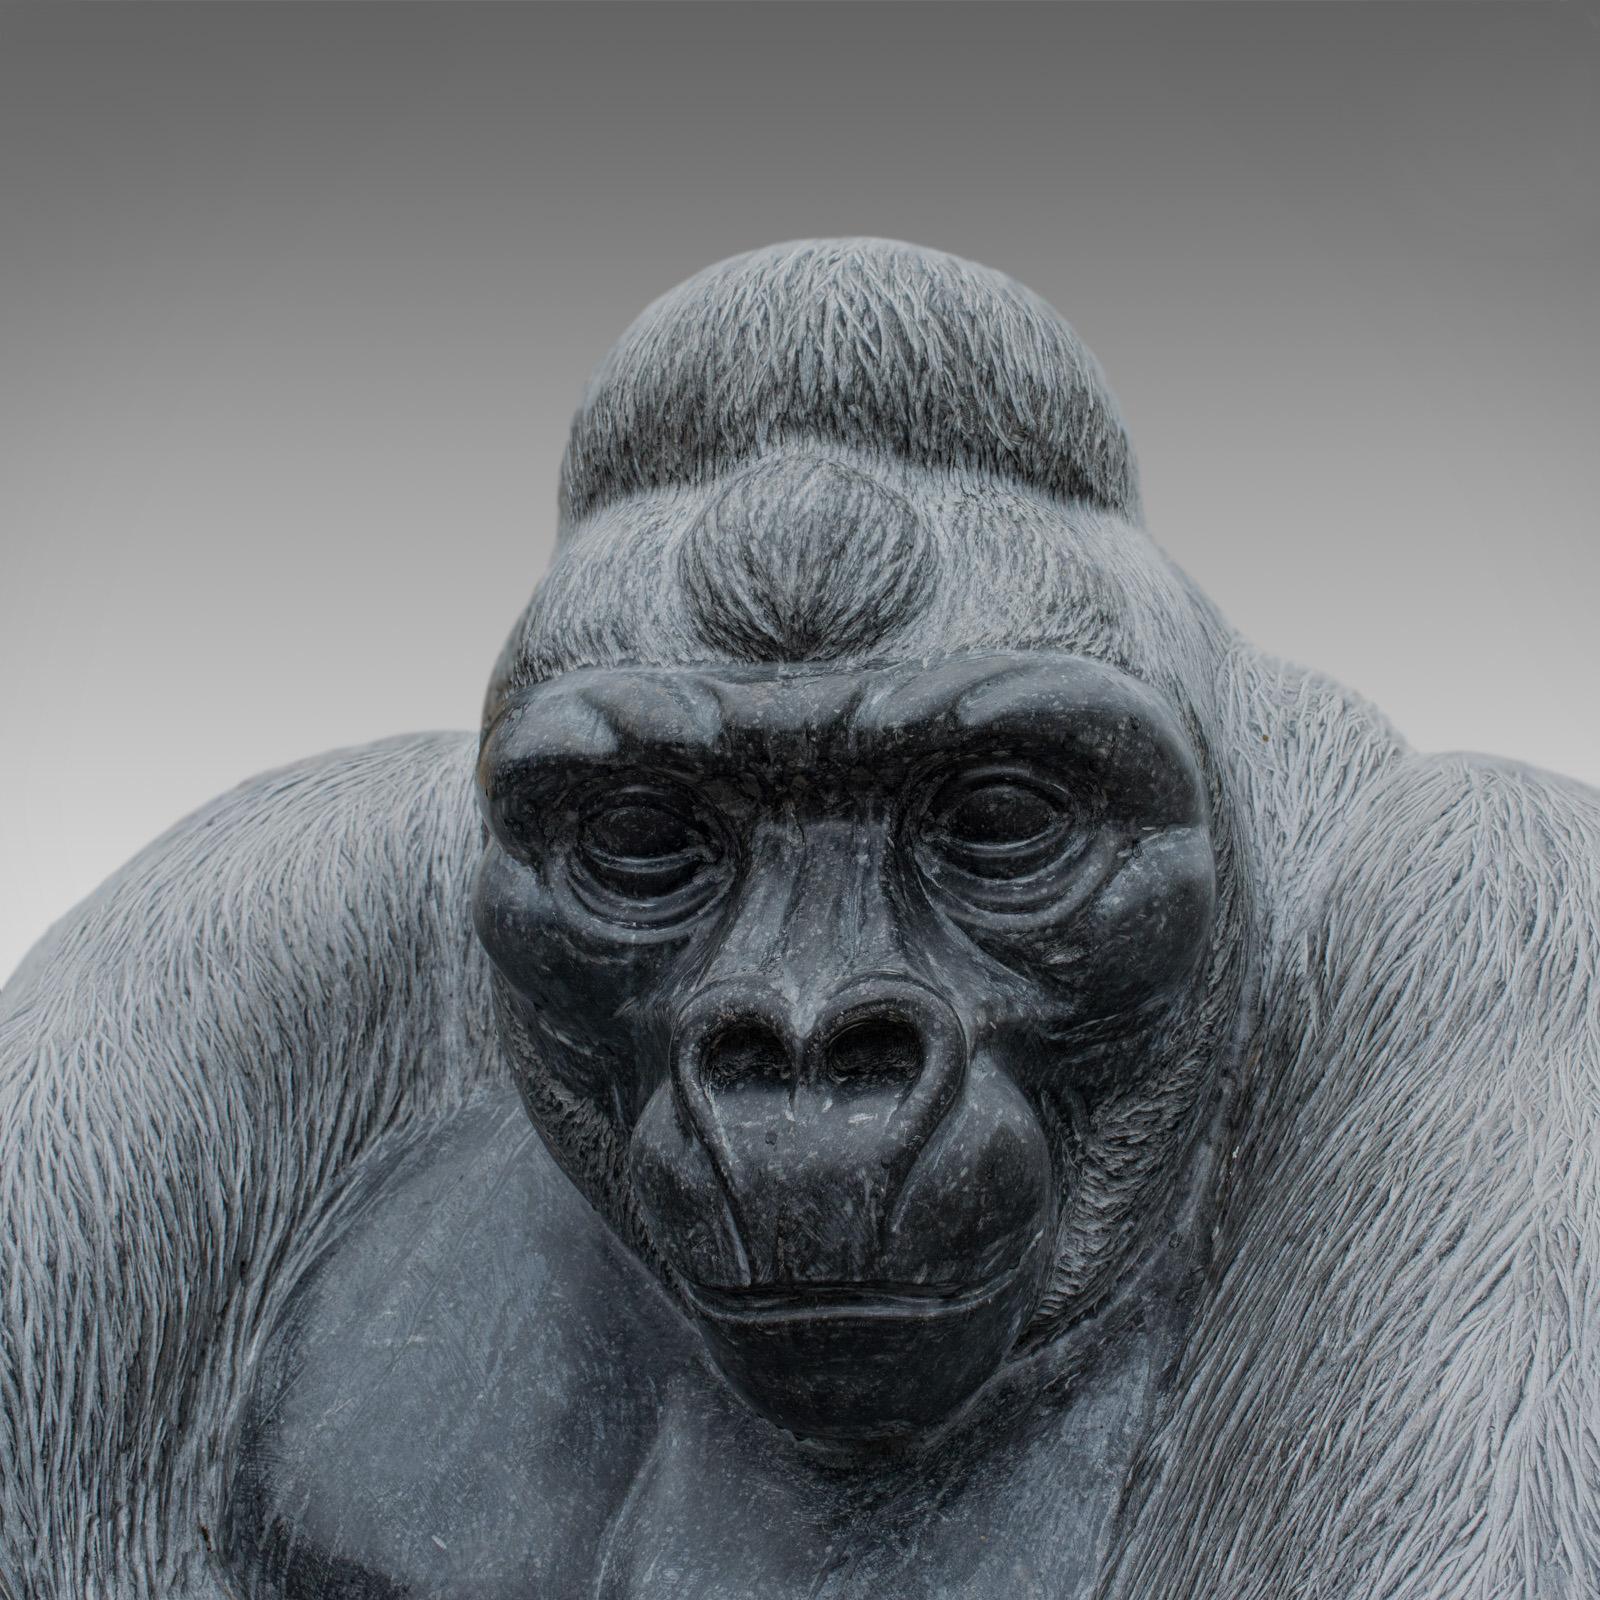 English Large Sculptural Artwork Marble Statue Shabani Lowland Gorilla by Dominic Hurley For Sale